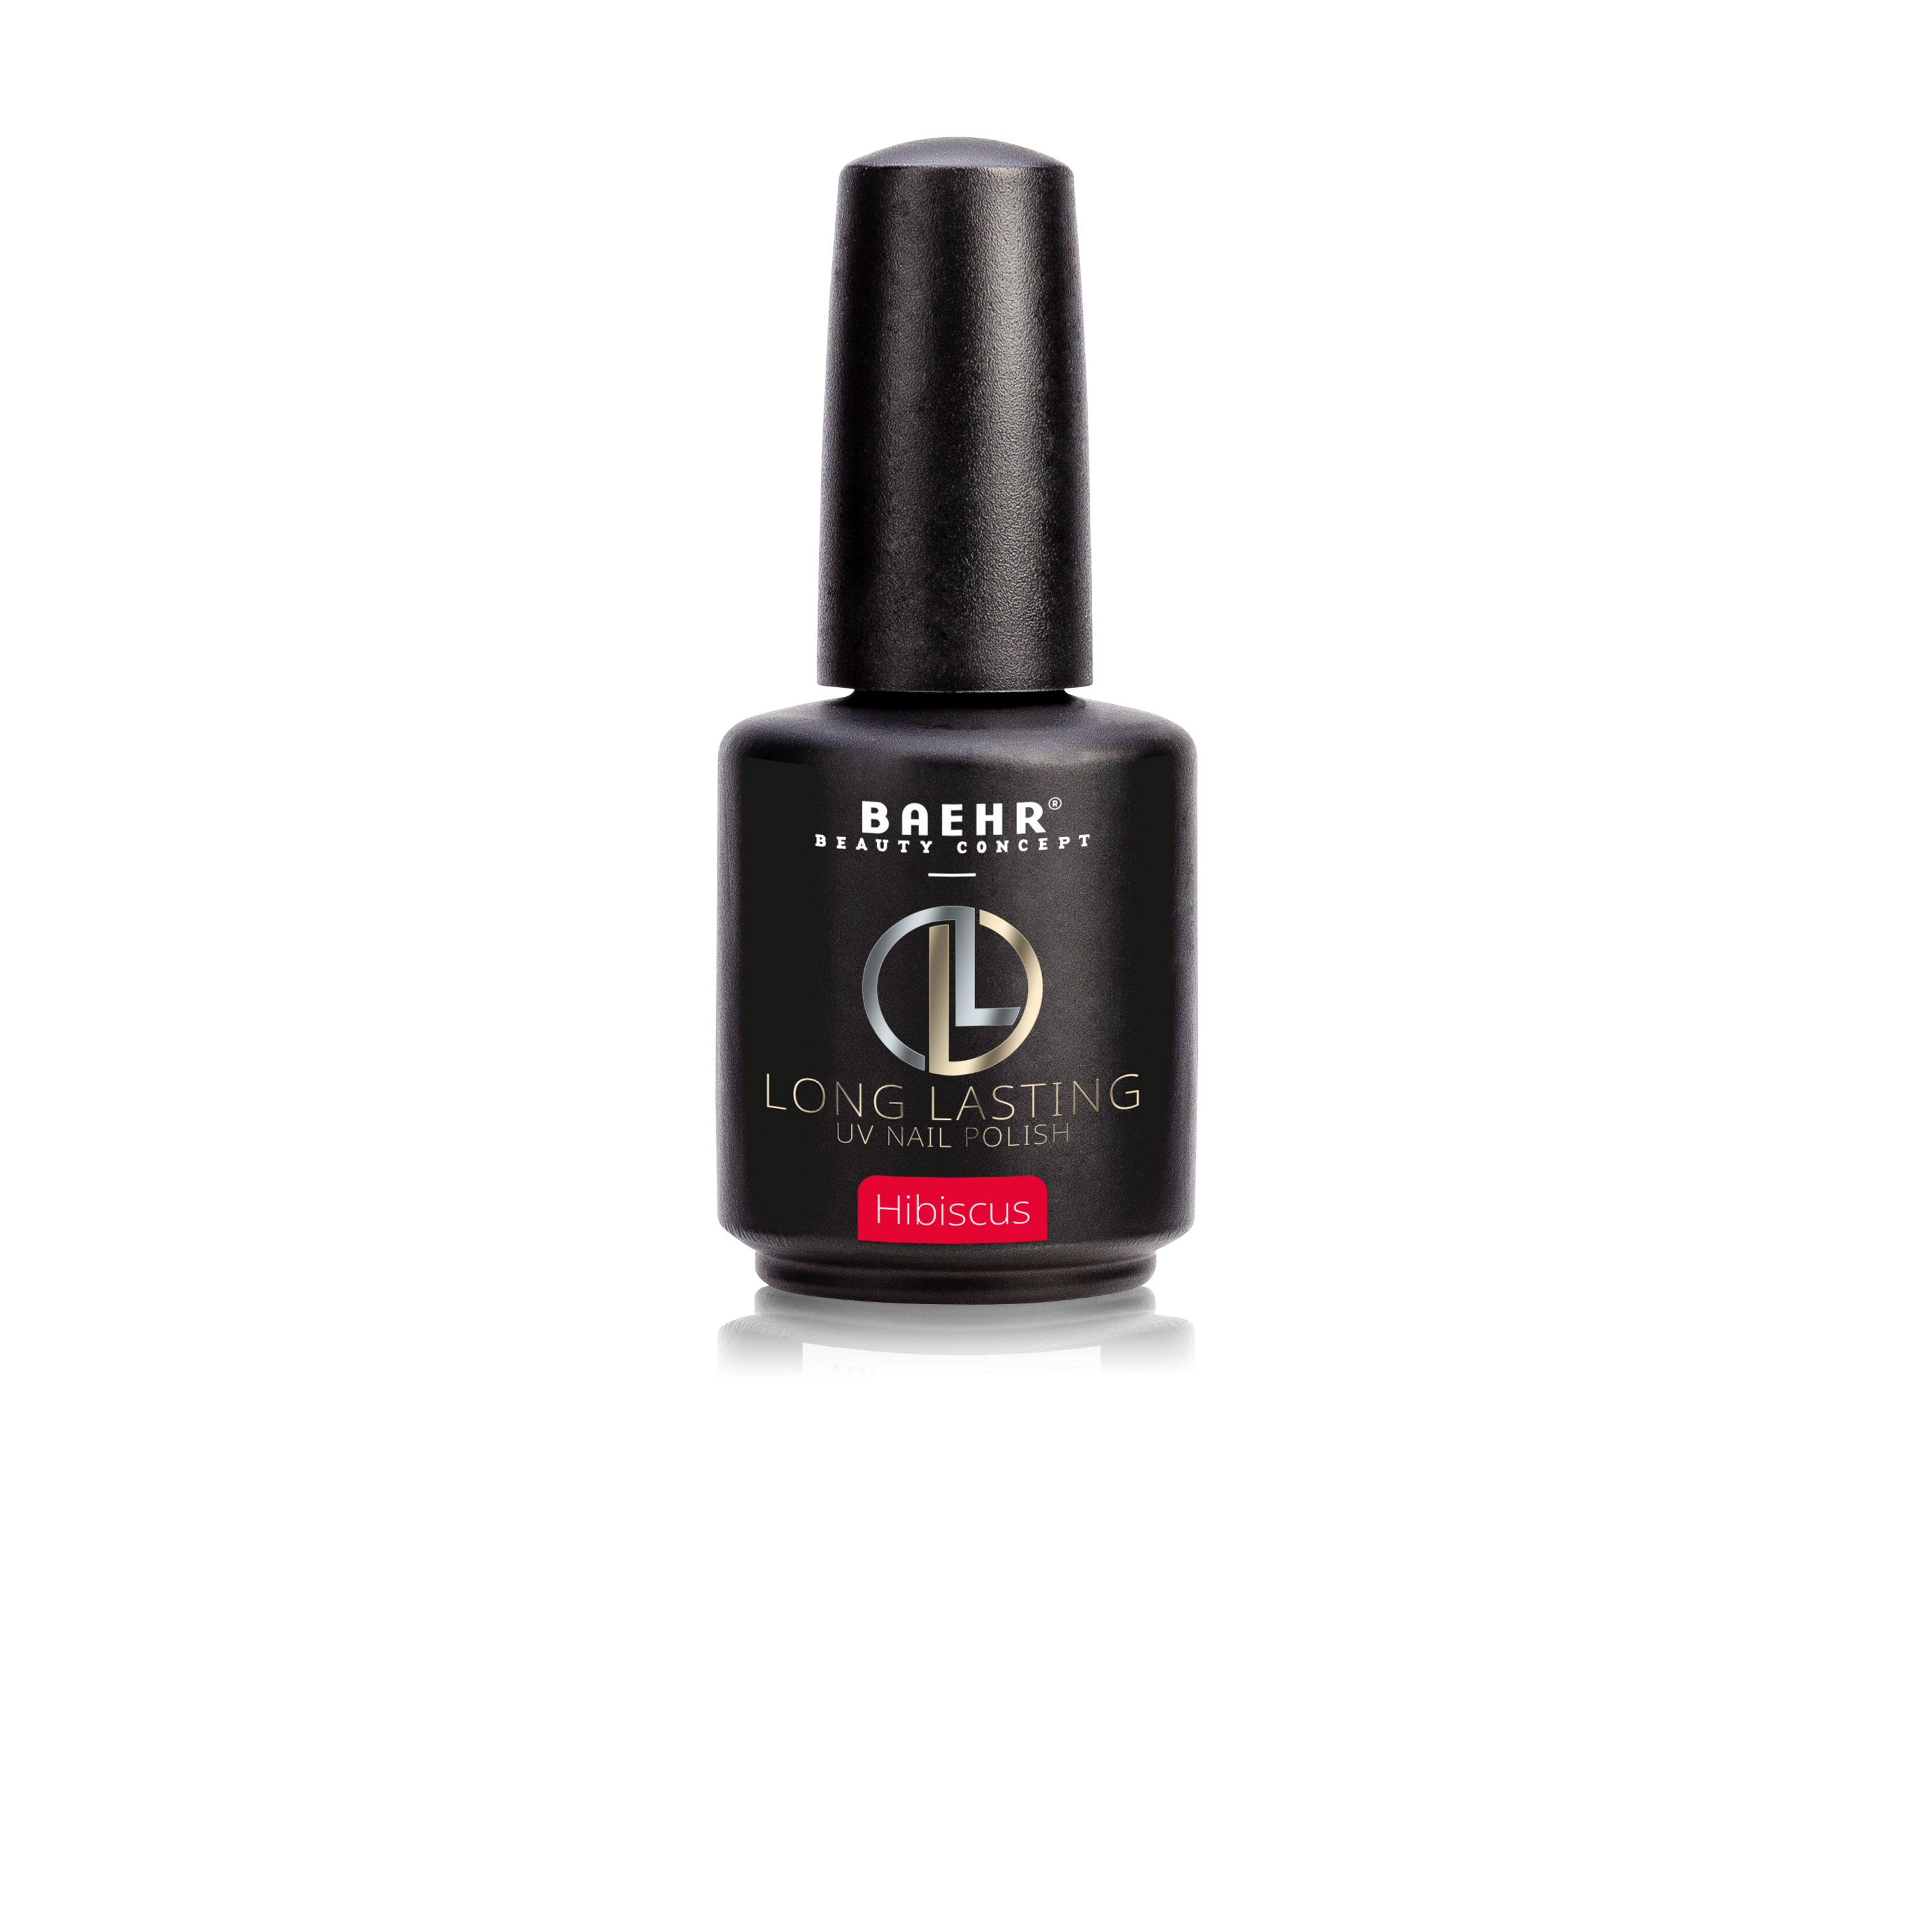 BAEHR BEAUTY CONCEPT - NAILS Long Lasting Hibiscus, 12 ml